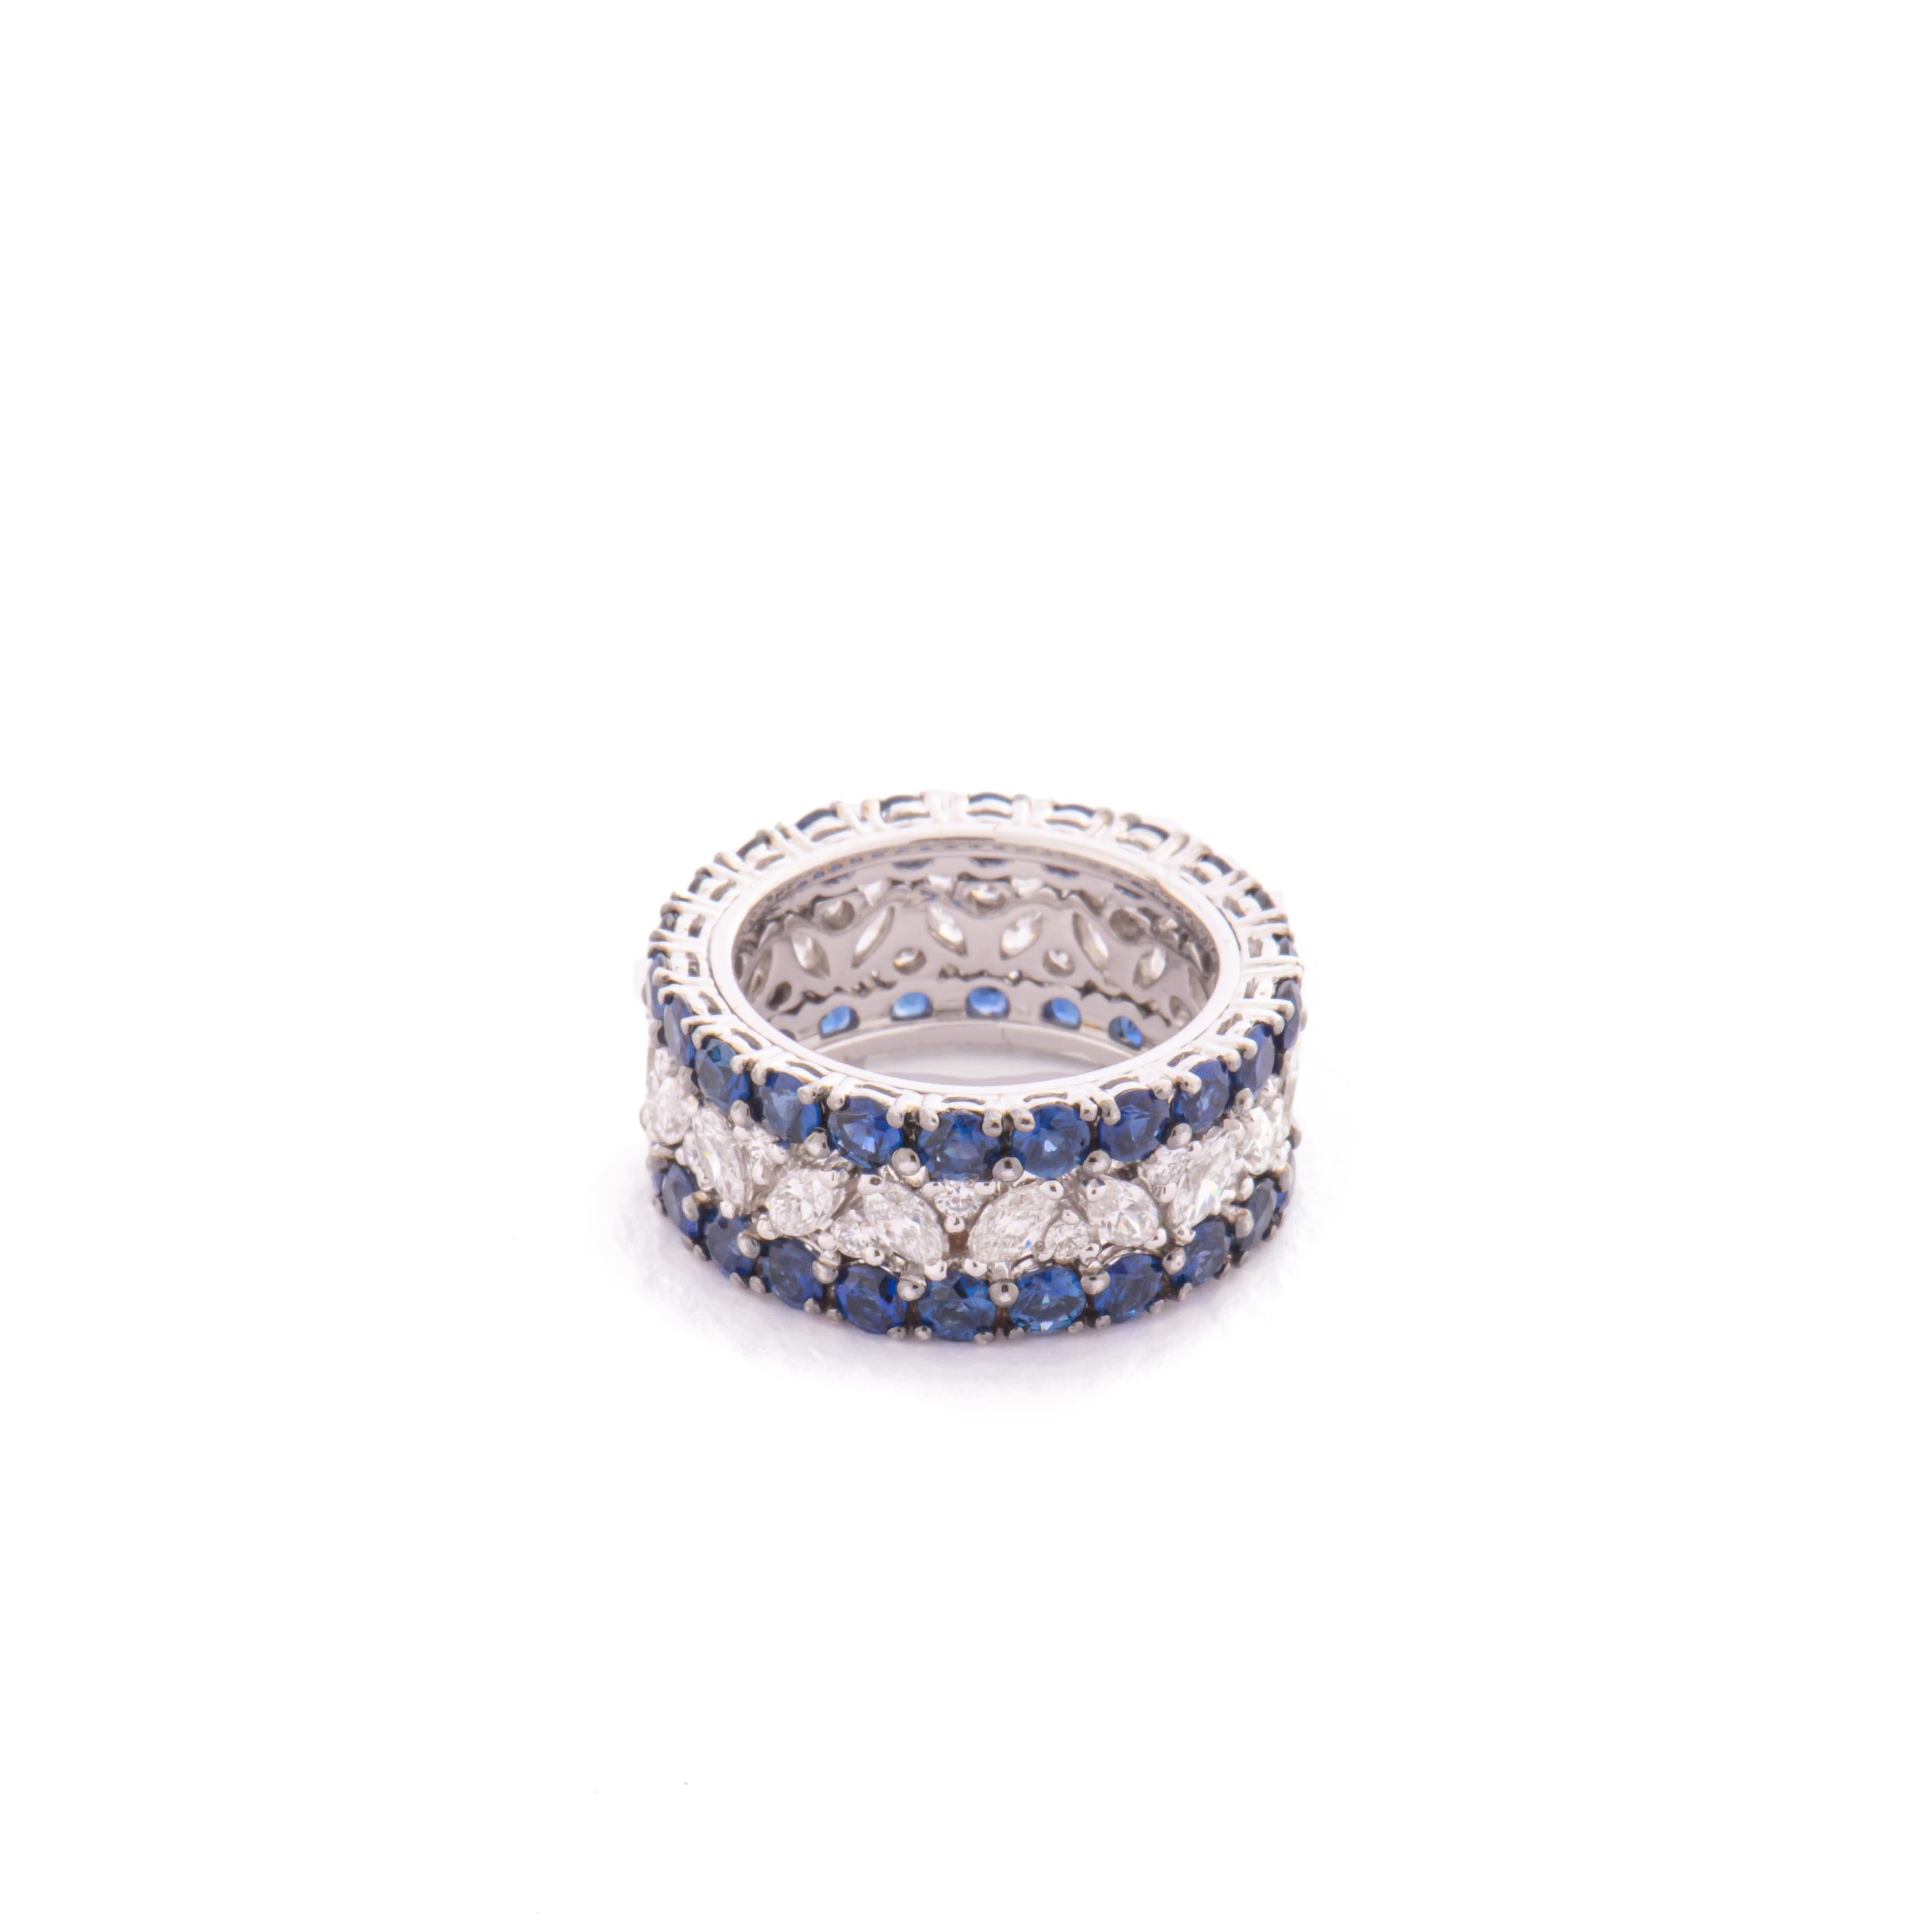 Contemporary 18 Karat White Gold, Diamonds and Sapphires Band Ring